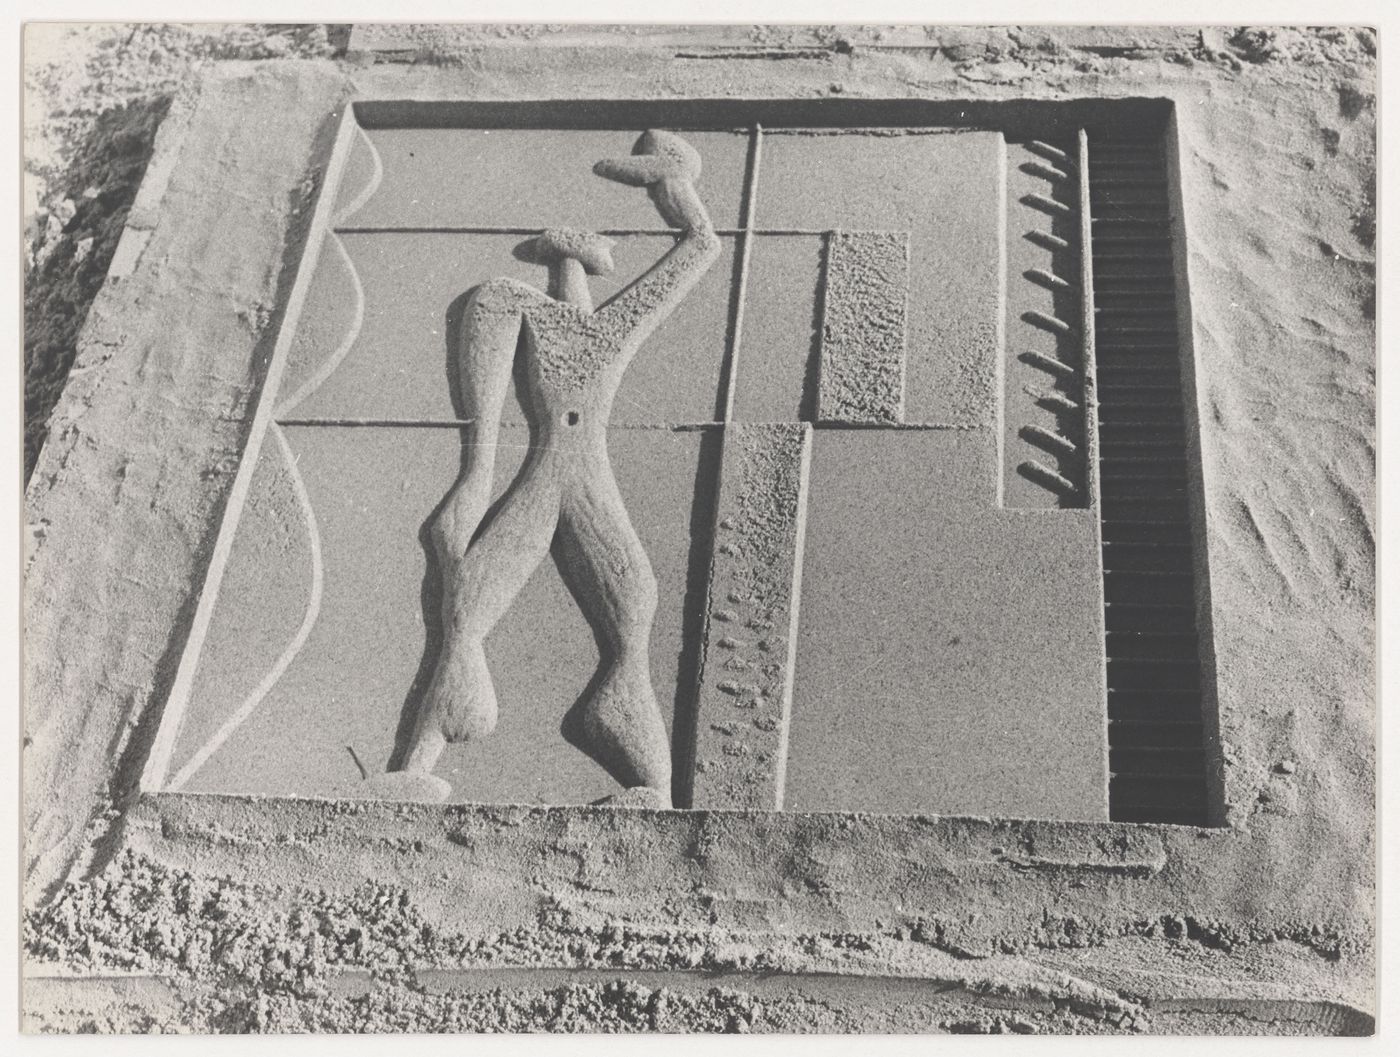 View of a bas-relief of the Modulor man sign by Le Corbusier, Chandigarh, India